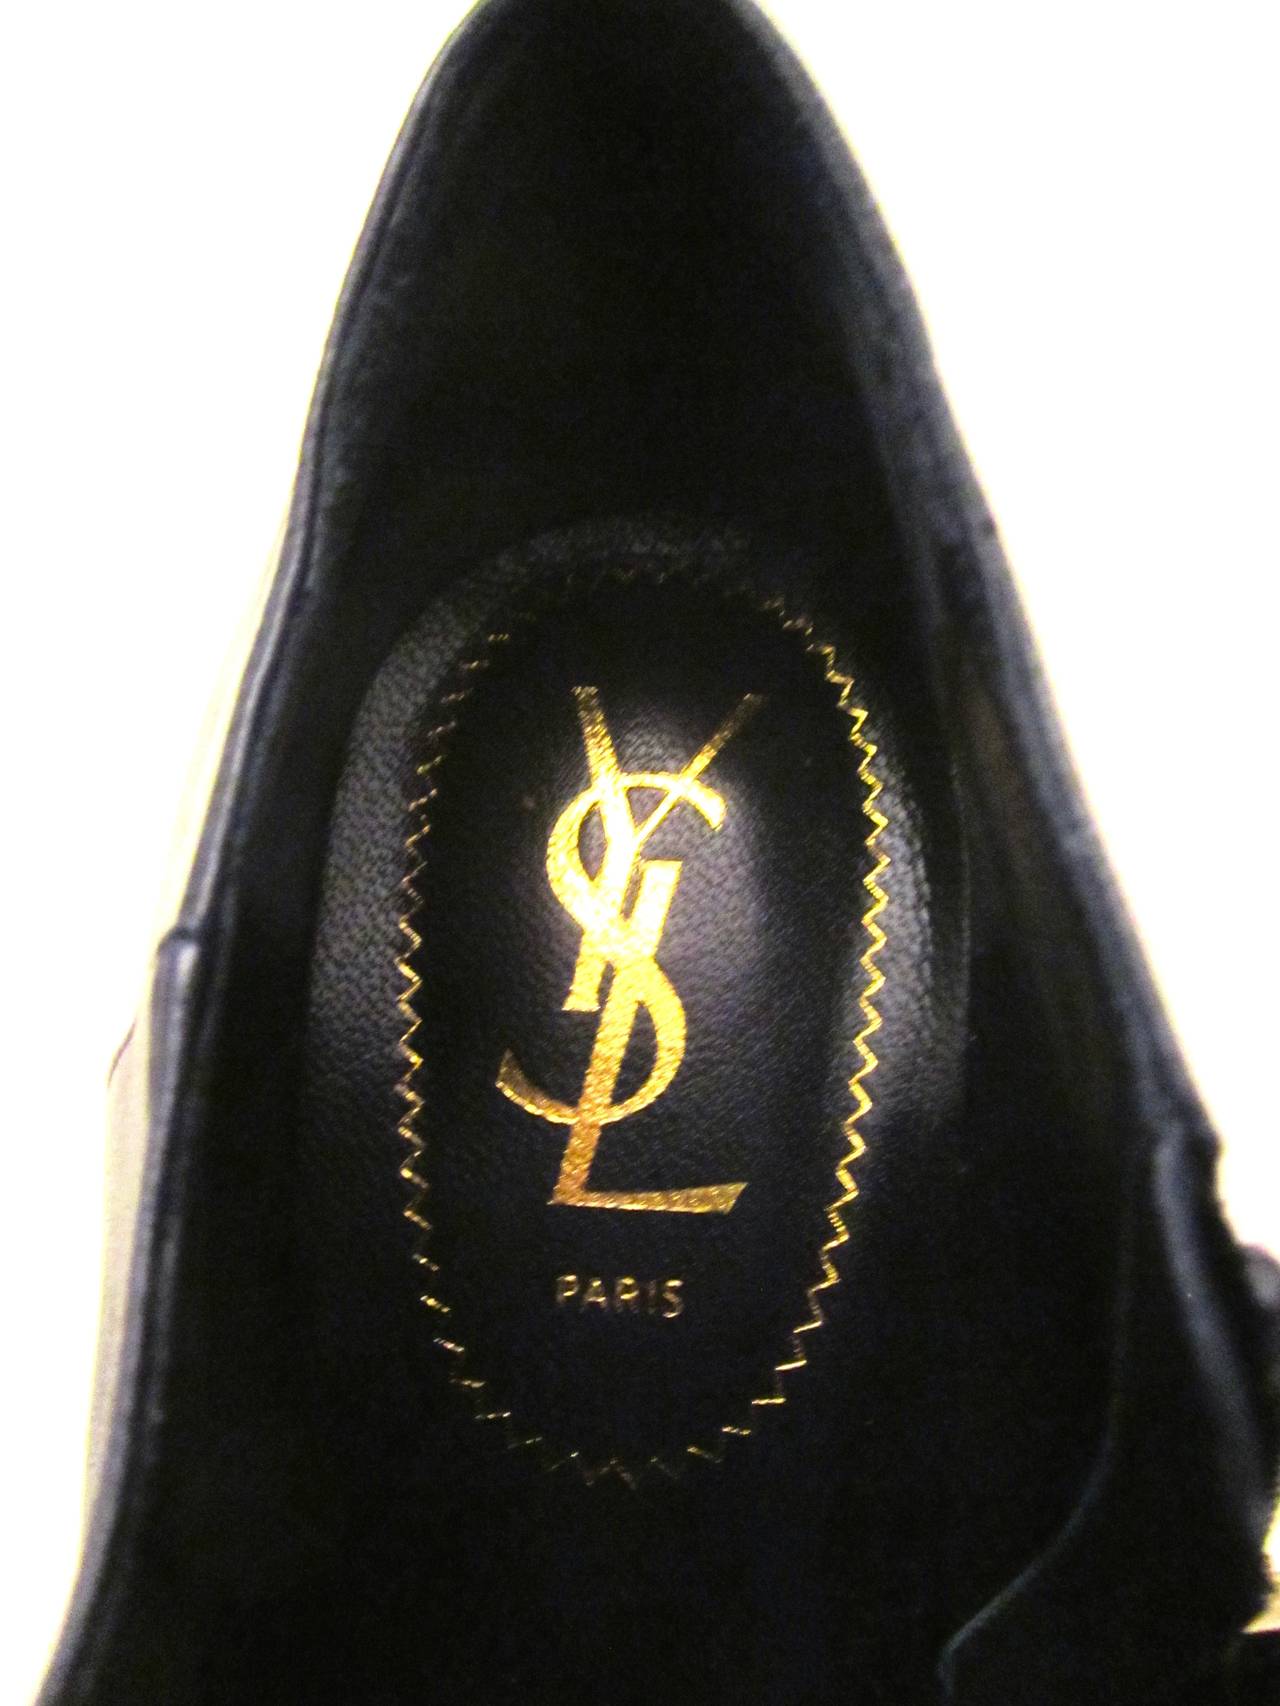 YSL Yves Saint Laurent High Heel Tribute Ankle Boots - Size 38 3